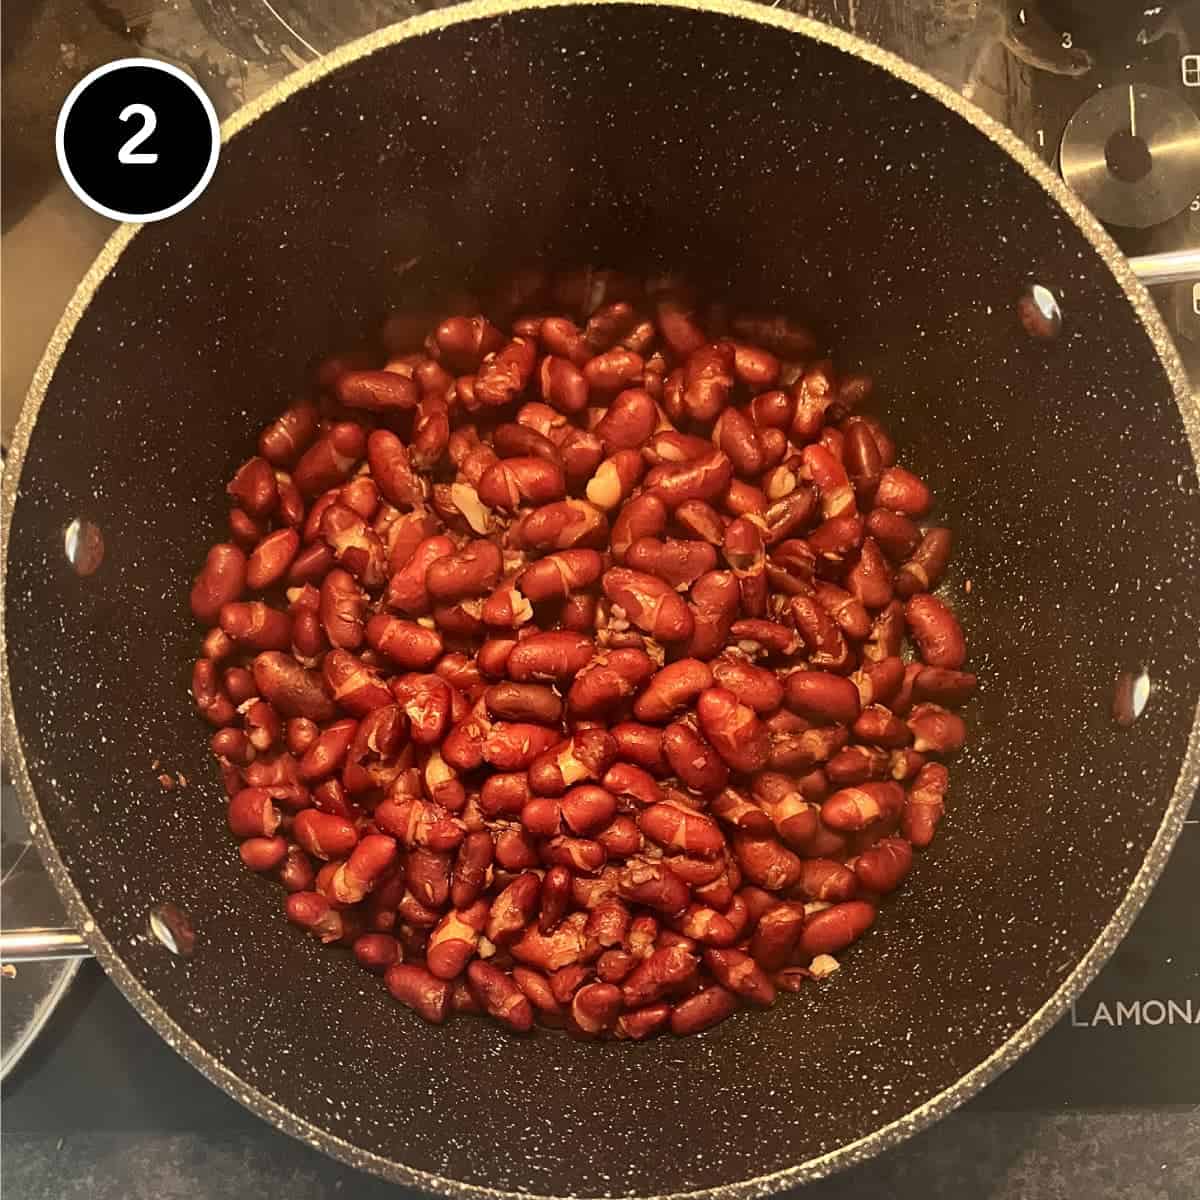 Cooked kidney beans in a pan